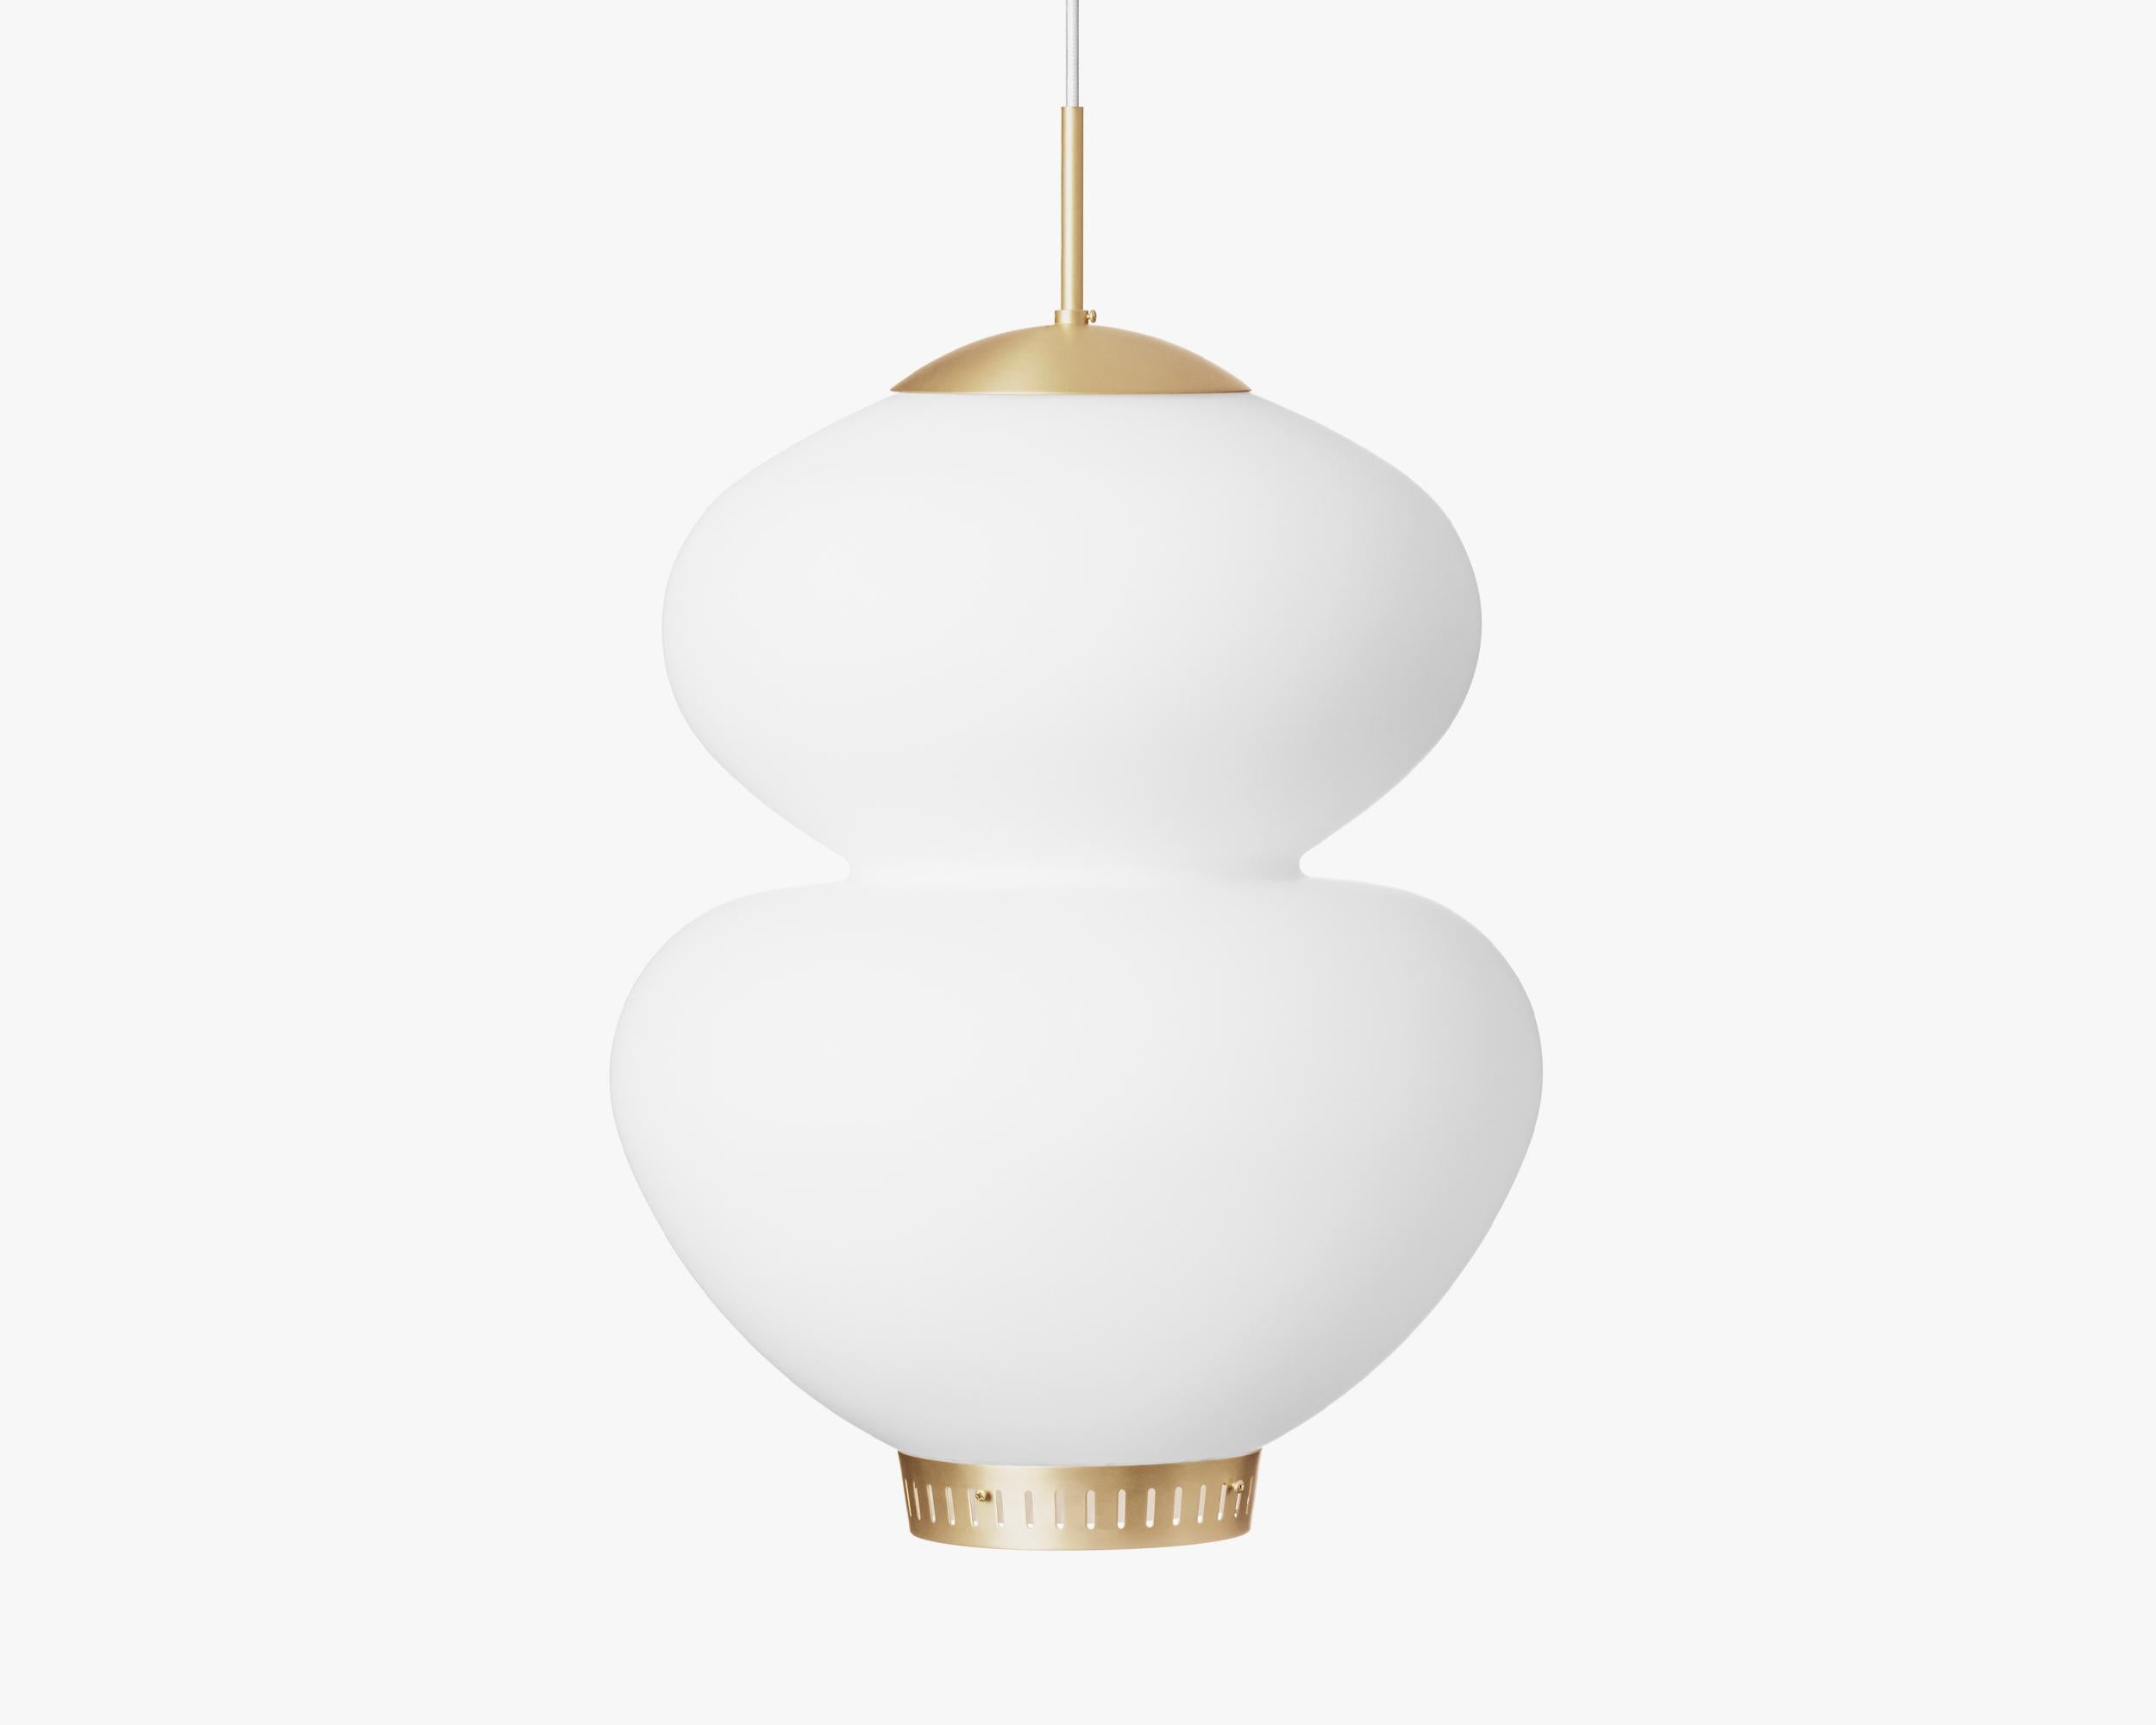 Pendant Lamp by Bent Karlby for Lyfa

Opal glass, brass

Sizes available:
D 175 mm – H 290 mm
D 250 mm – H 420 mm
D 400 mm – H 620 mm

Textile wire (black) 300cm
Bulb: E14/E27 max 40/60W (110V-230V)

--
The Peanut lamp is a mid-century